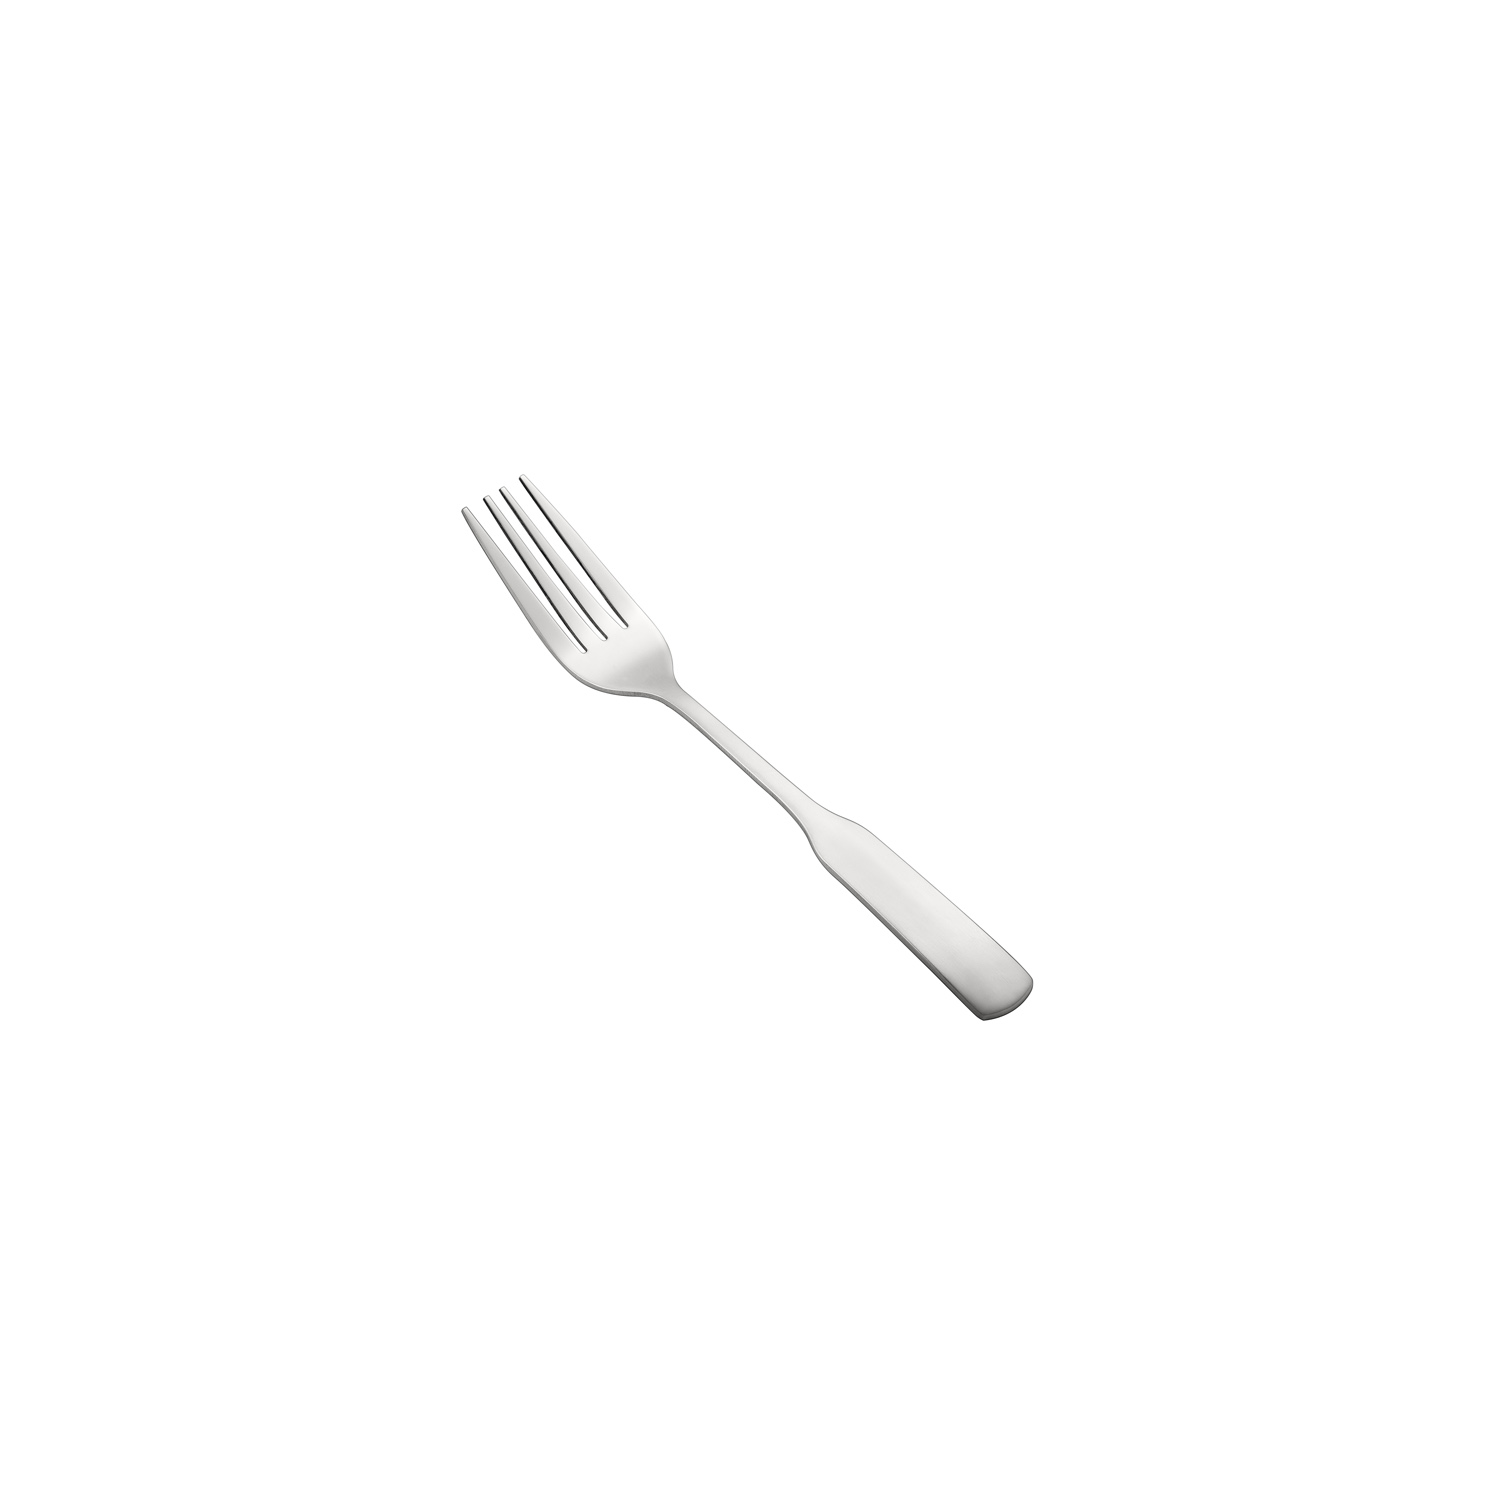 CAC China 3013-05 Thames Dinner Fork, Heavyweight 18/0, 7 1/4"